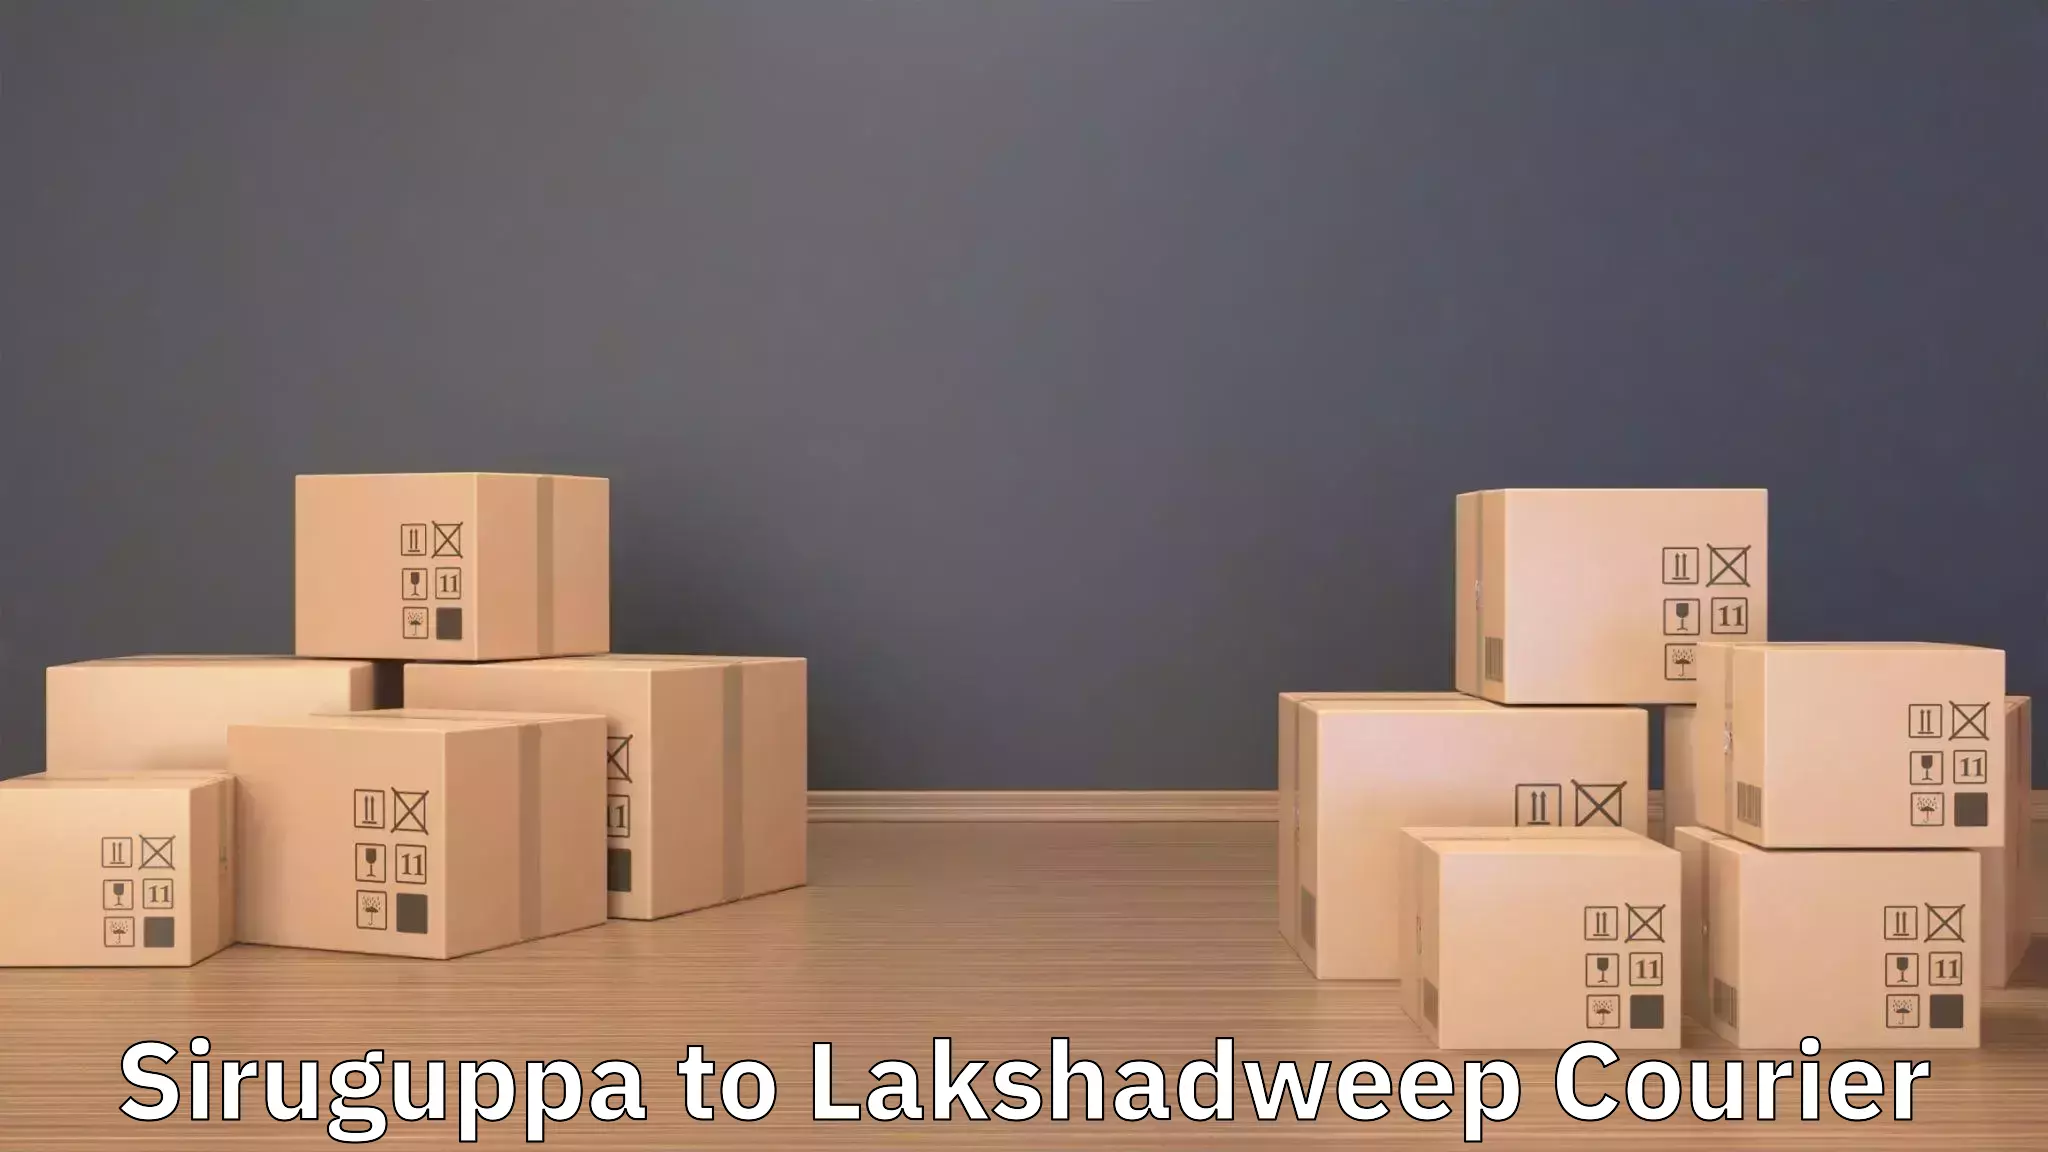 Professional home relocation in Siruguppa to Lakshadweep